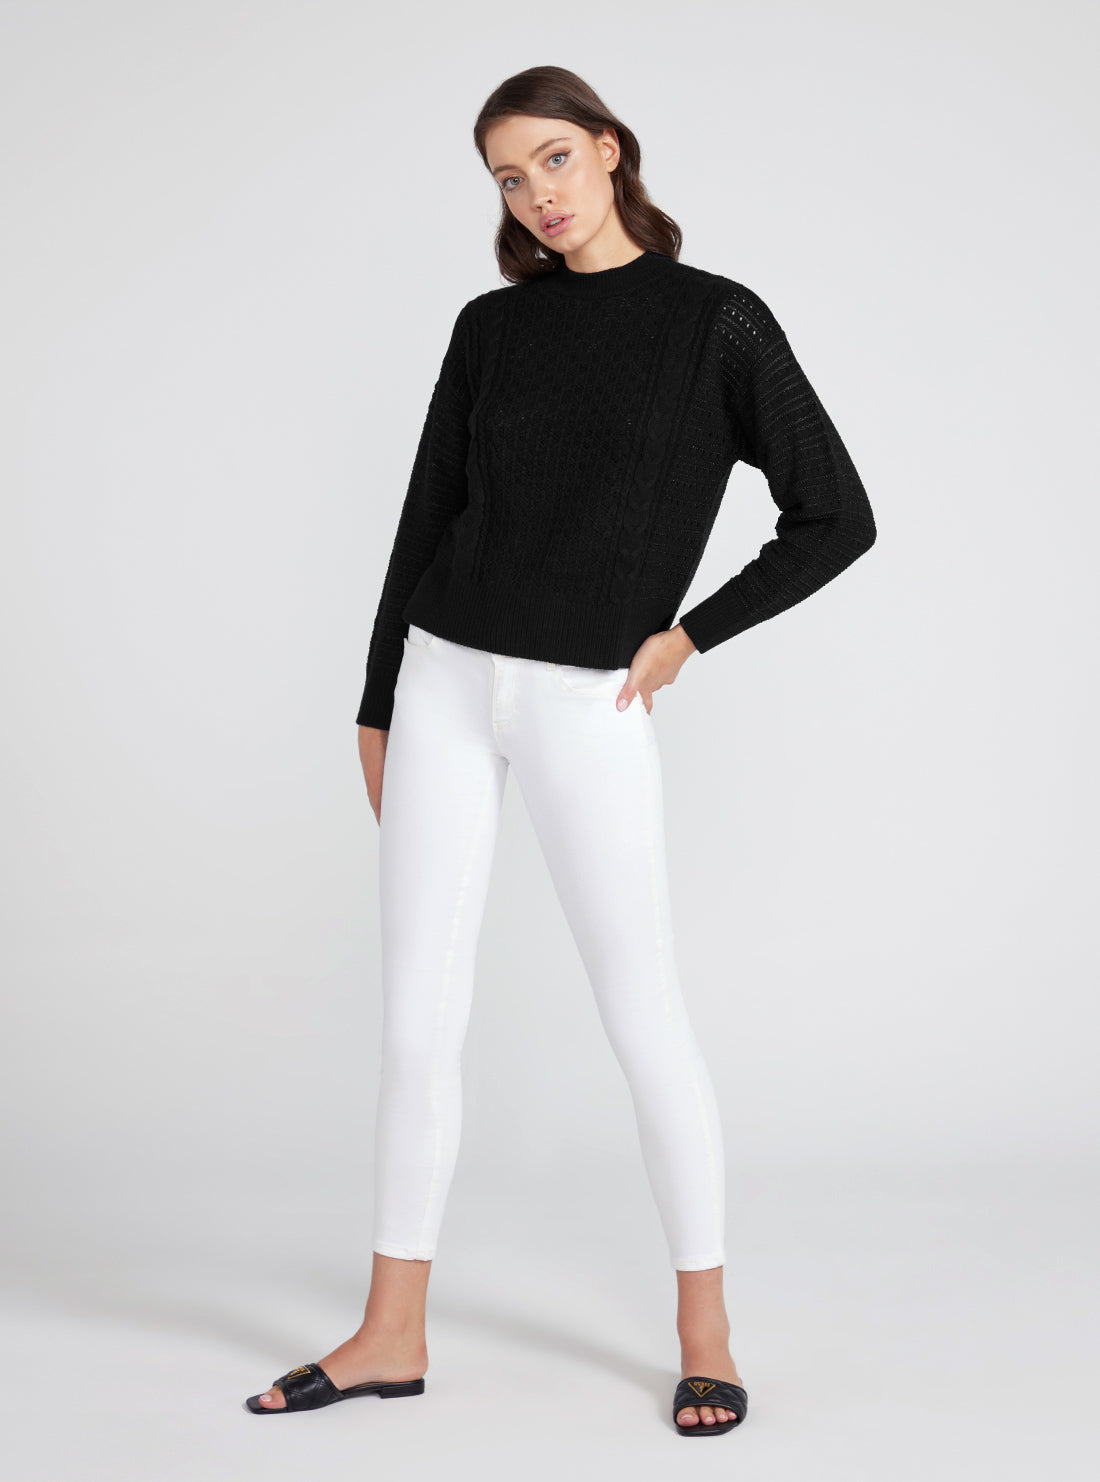 GUESS Black Long Sleeve Edwige Sweater full view